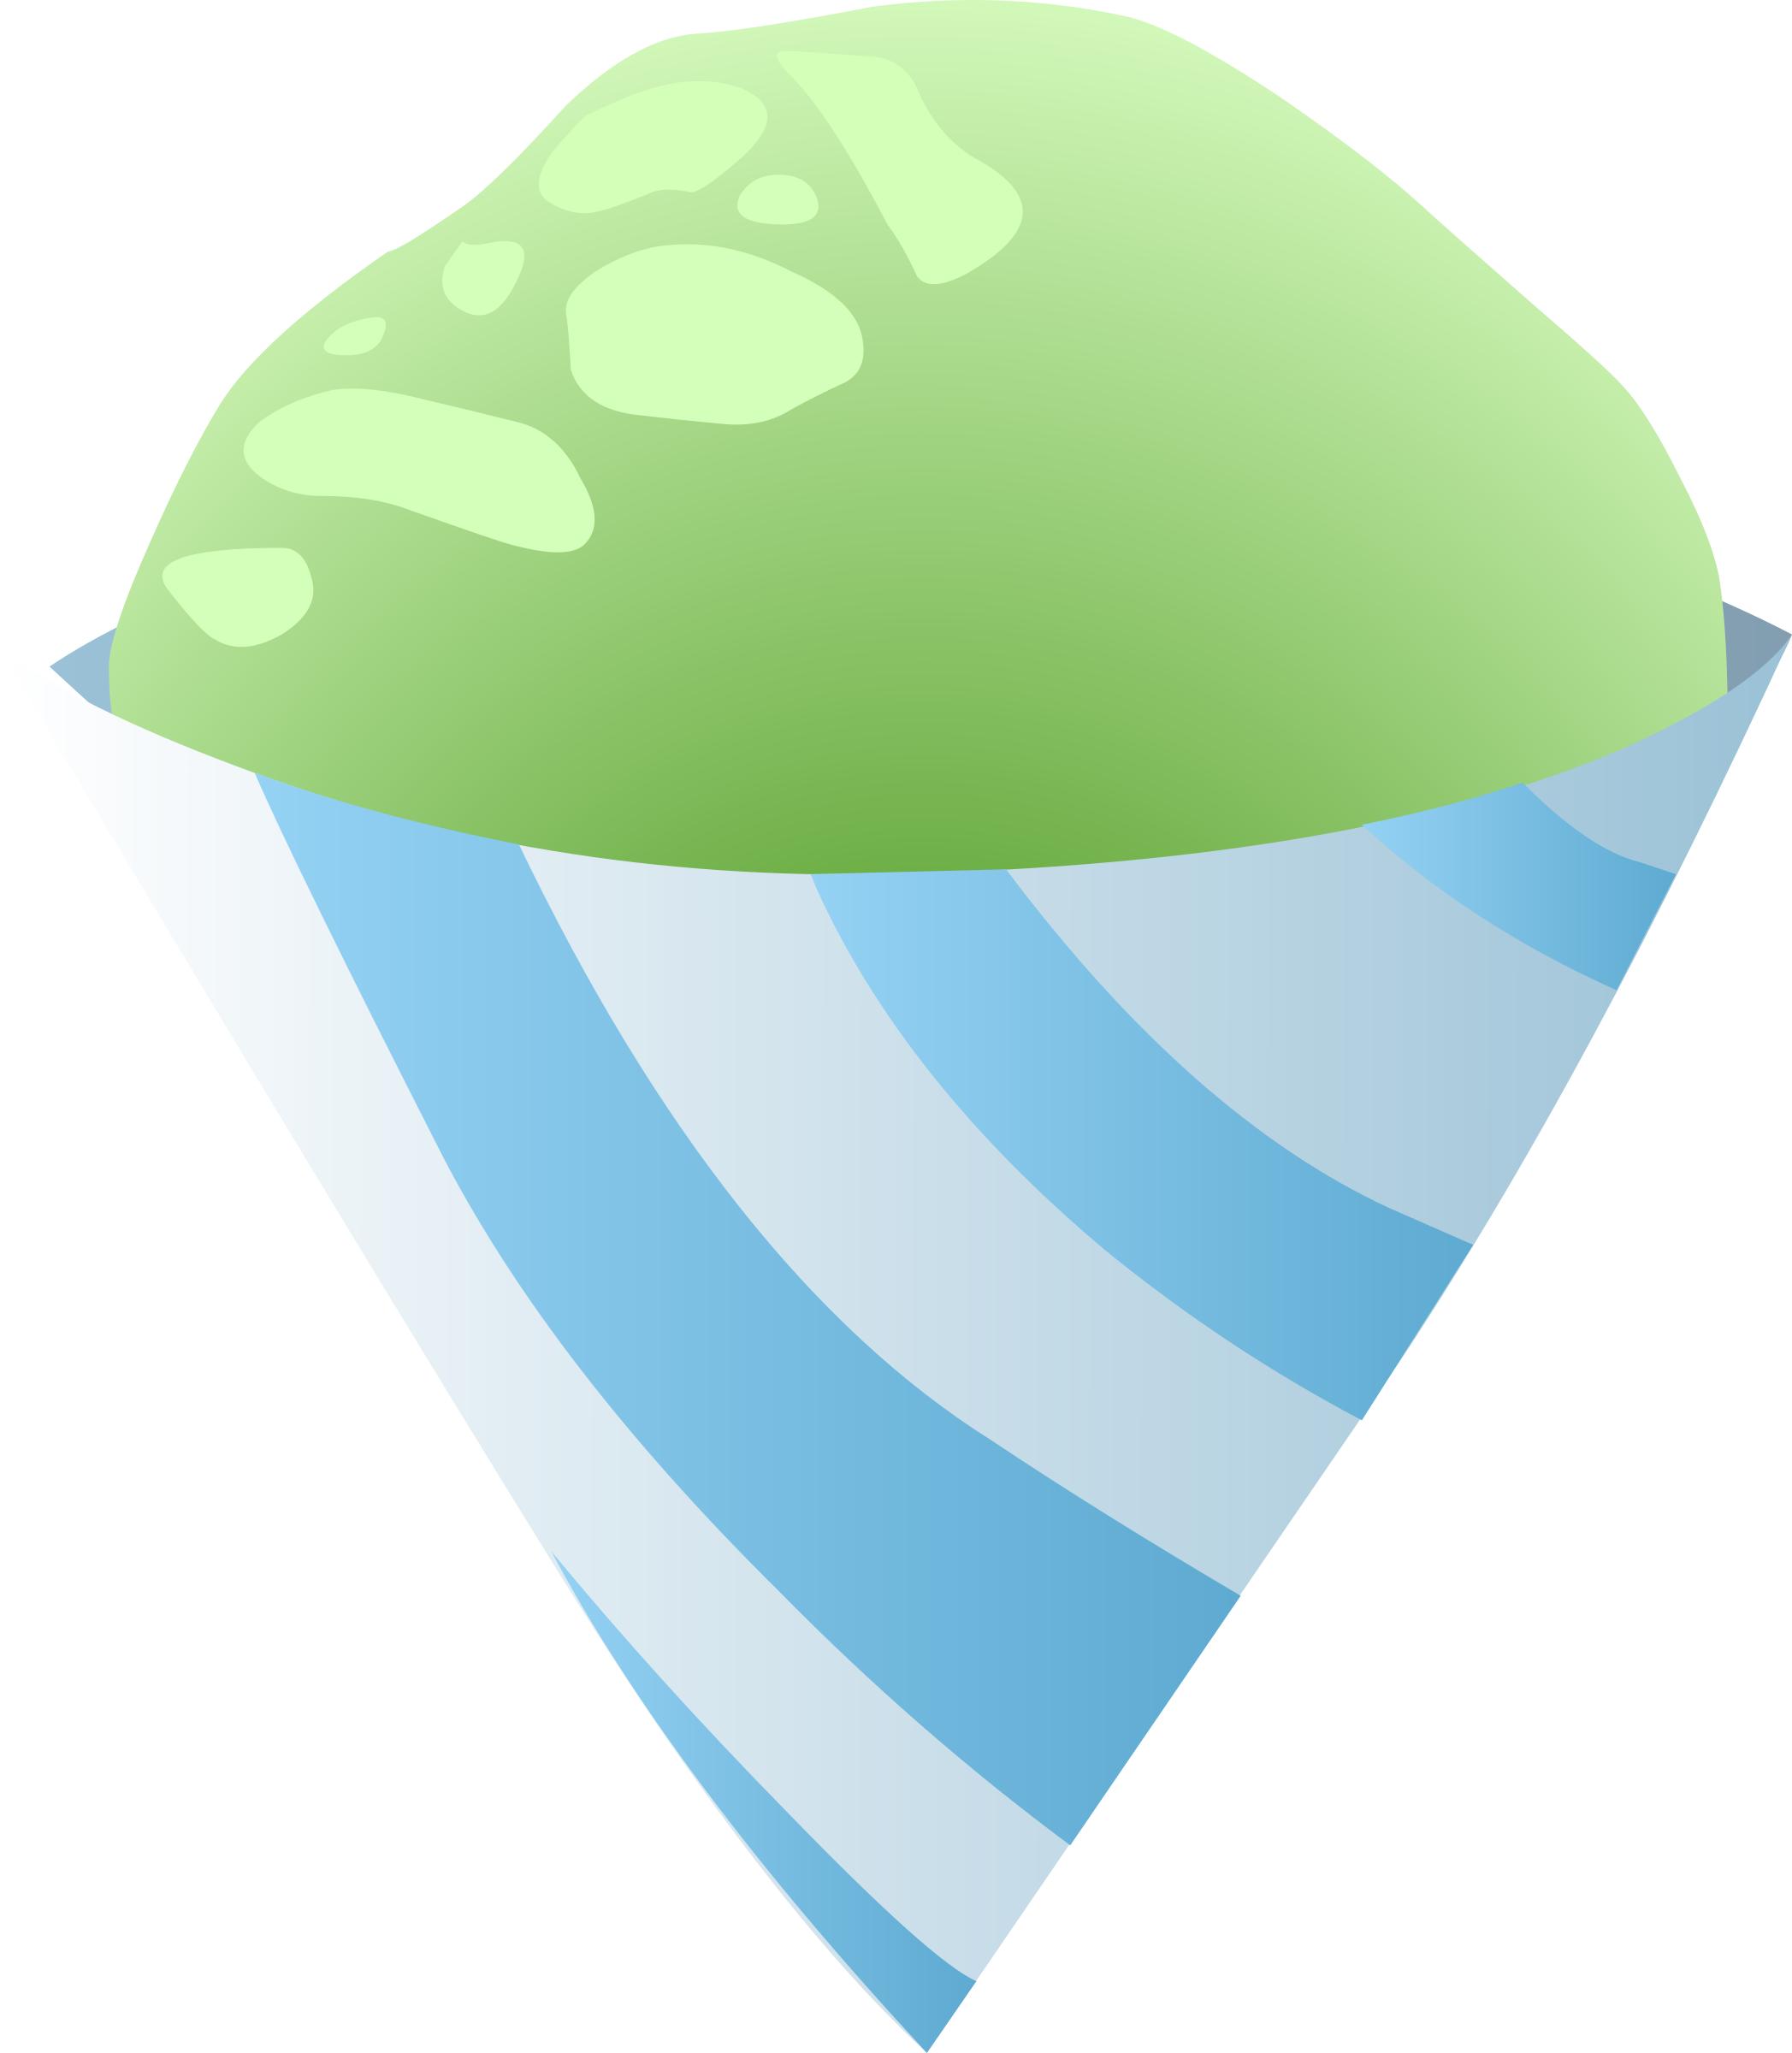 Food Sno Cone Green icons